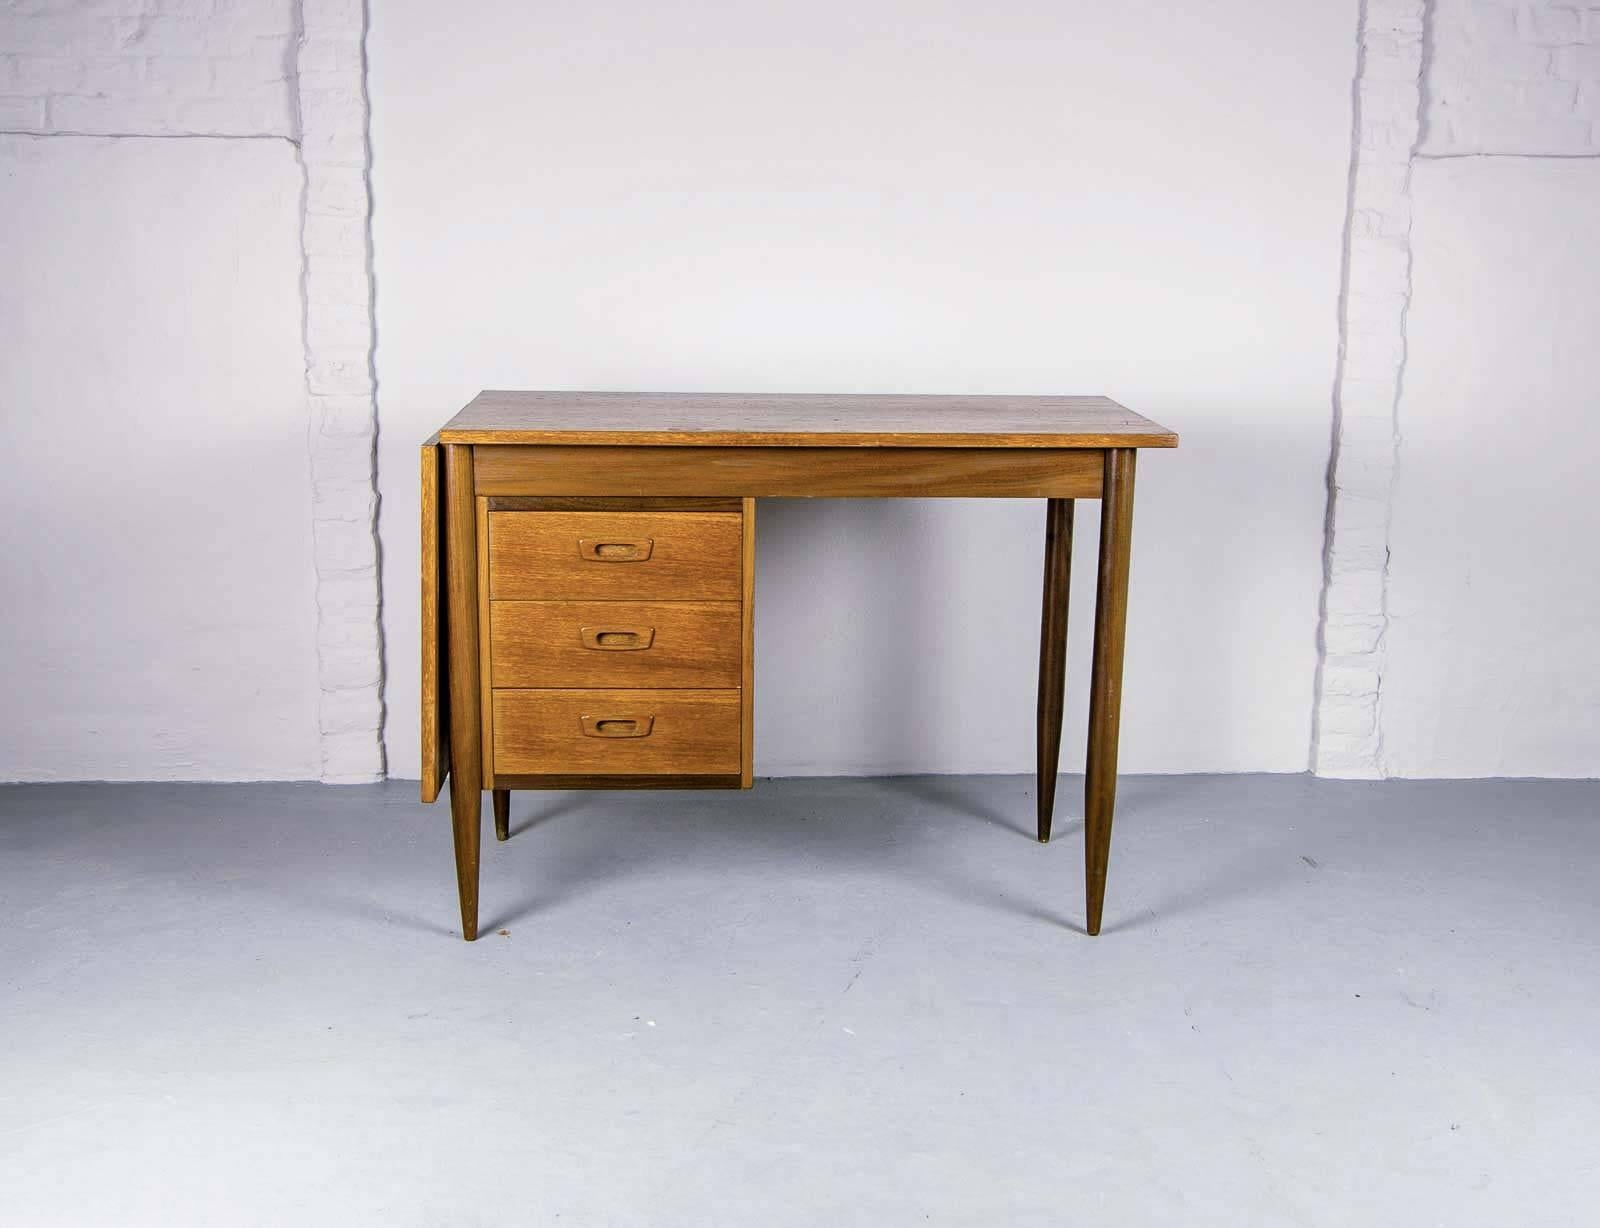 This teak writing desk was designed by Arne Vodder and was produced in Finland in the 1960s for Asko. It is made from teak and features a drop leaf on the left hand side, that, when lifted and sided extends the working space area of the desk top